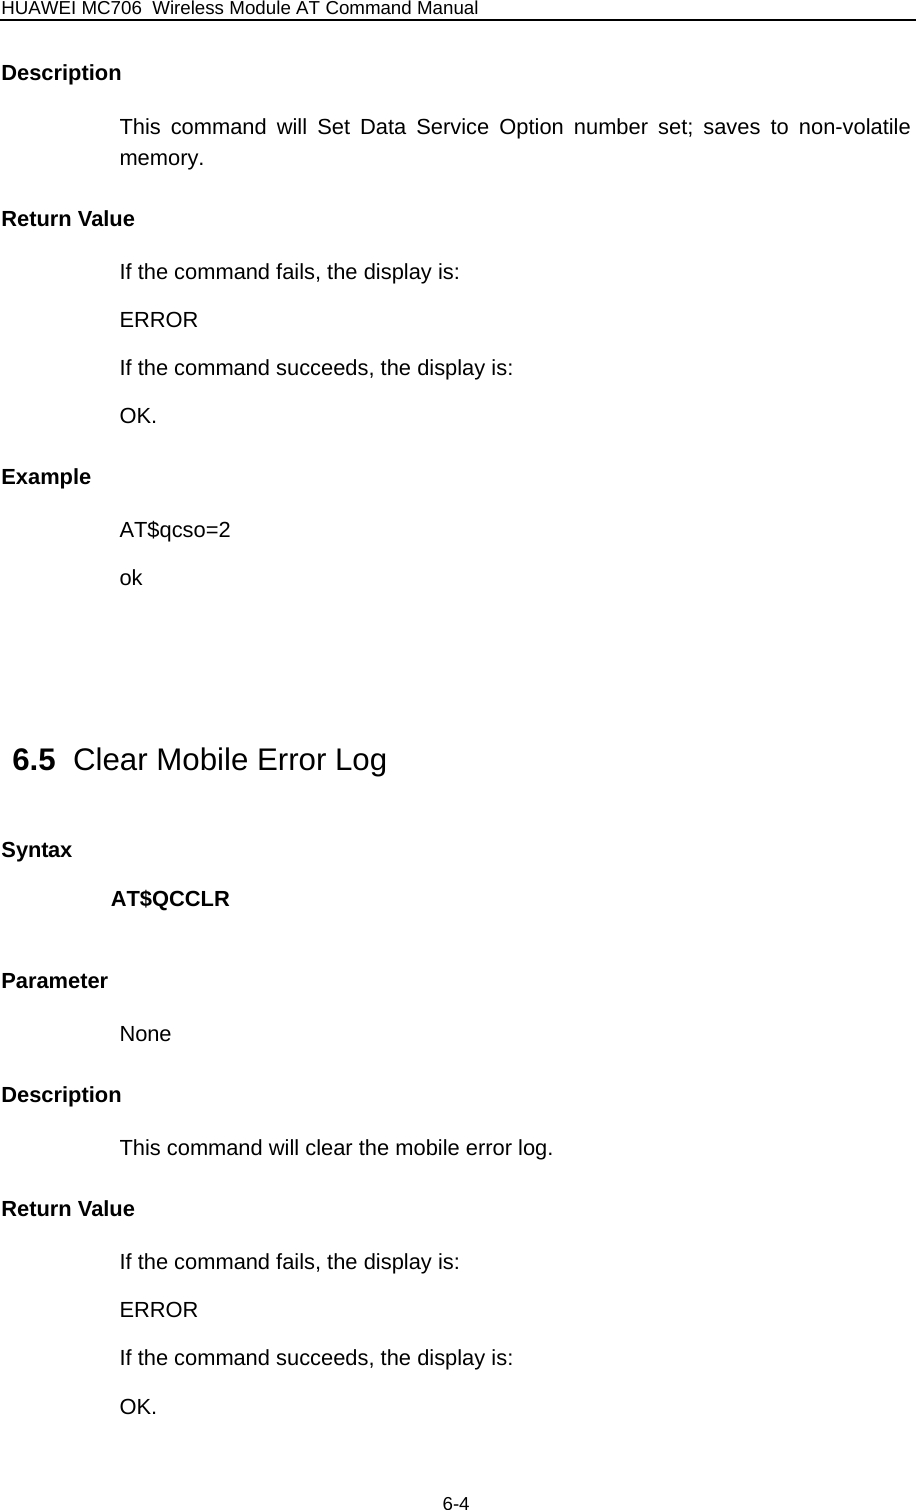 HUAWEI MC706 Wireless Module AT Command Manual  Description This command will Set Data Service Option number set; saves to non-volatile memory. Return Value If the command fails, the display is: ERROR If the command succeeds, the display is: OK. Example AT$qcso=2 ok   6.5  Clear Mobile Error Log Syntax AT$QCCLR  Parameter None Description This command will clear the mobile error log. Return Value If the command fails, the display is: ERROR If the command succeeds, the display is: OK. 6-4 